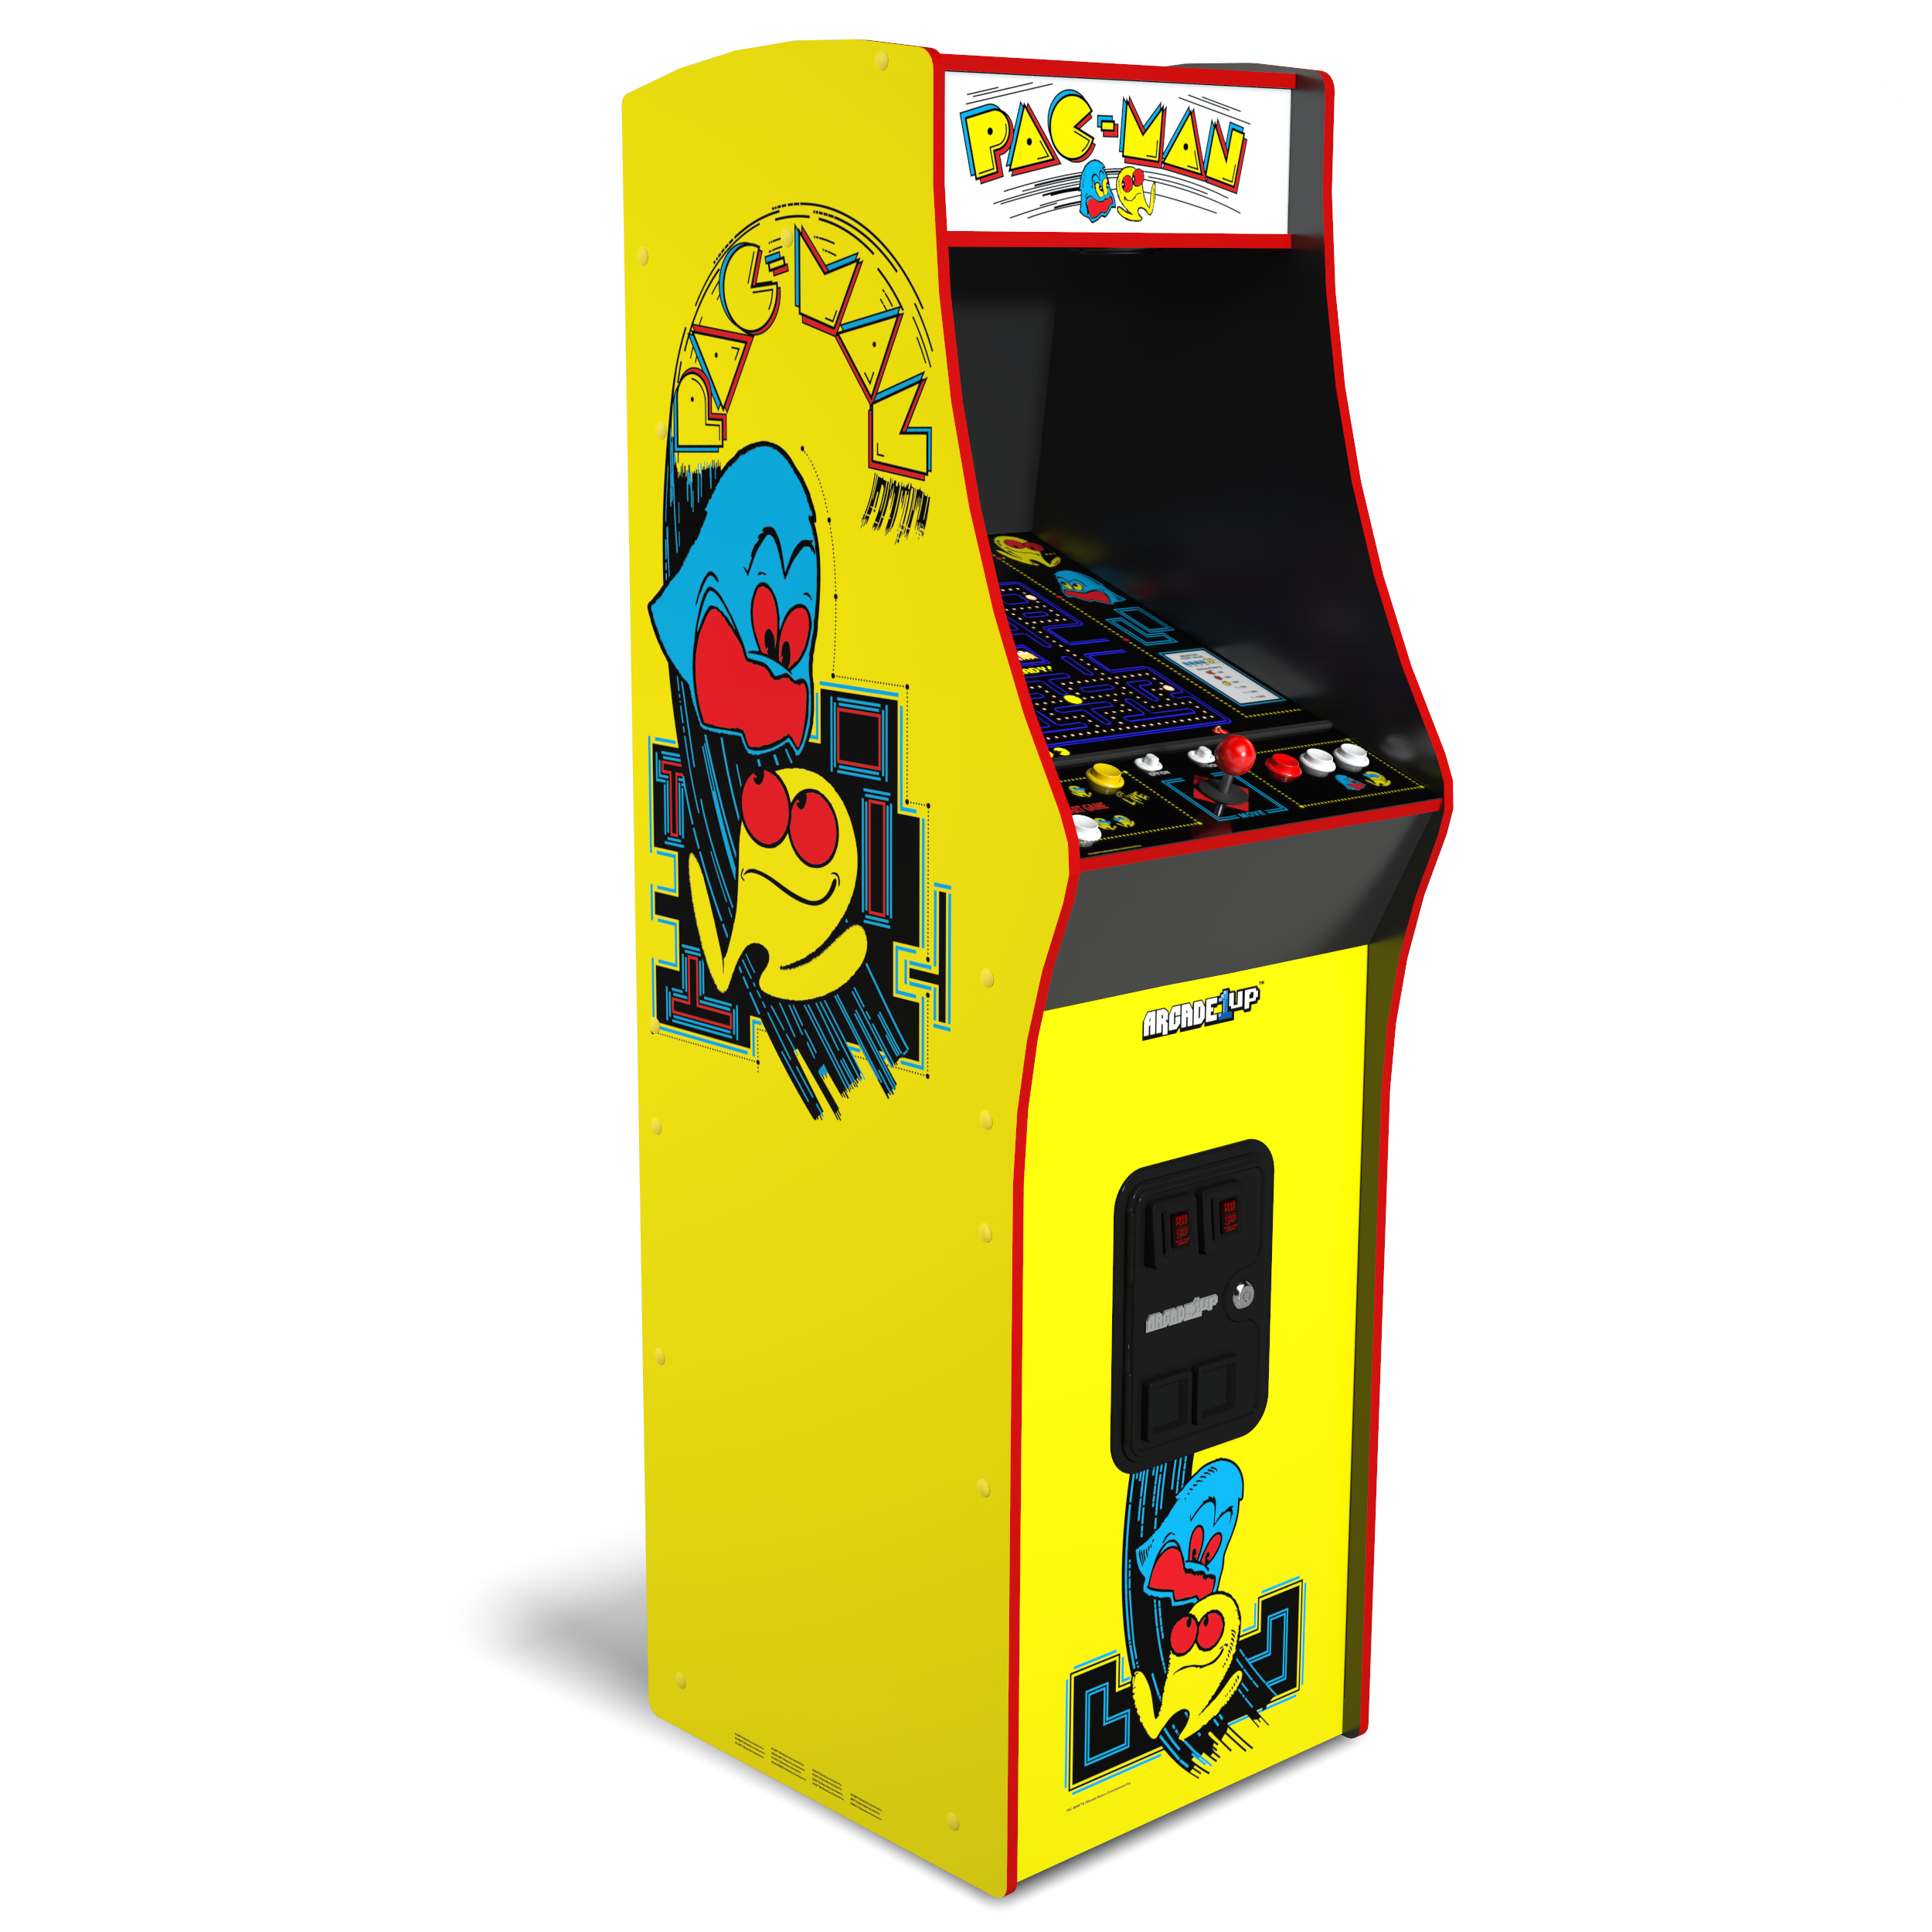 Mortal Kombat Arcade Cabinet With Free Online Multiplayer Announced